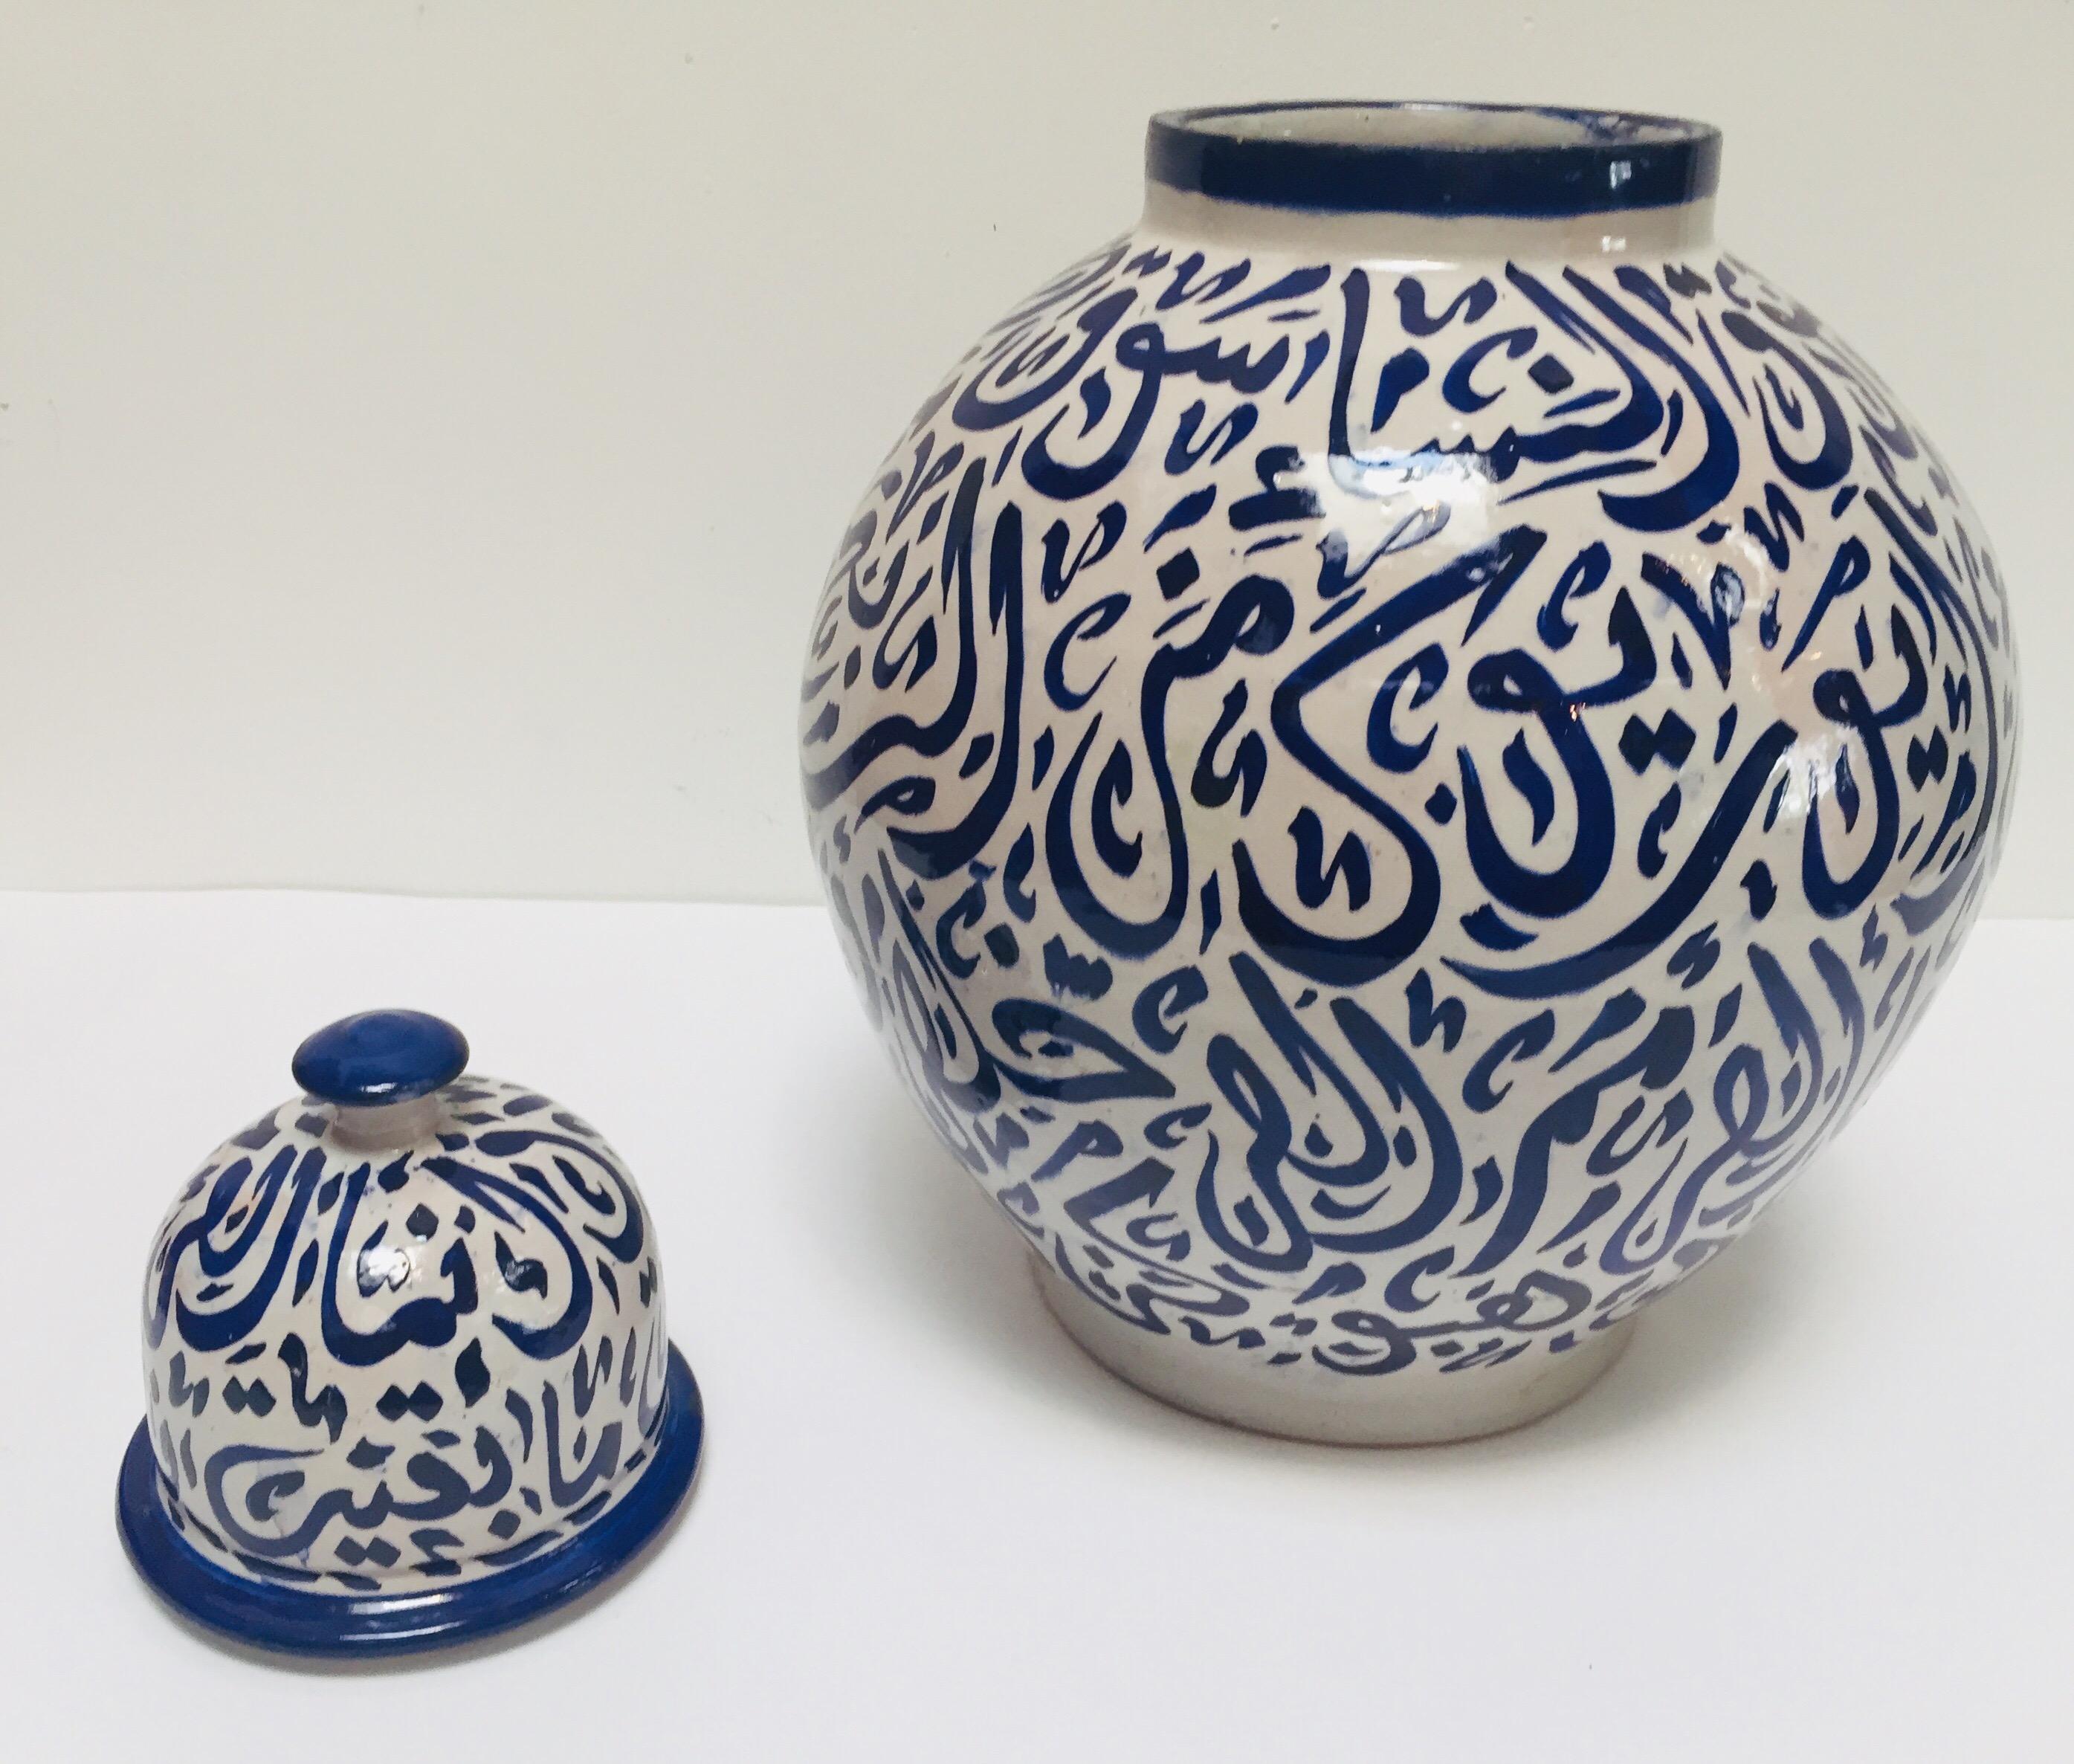 Moroccan Blue Ceramic Lidded Urn with Arabic Calligraphy Writing, Fez For Sale 7